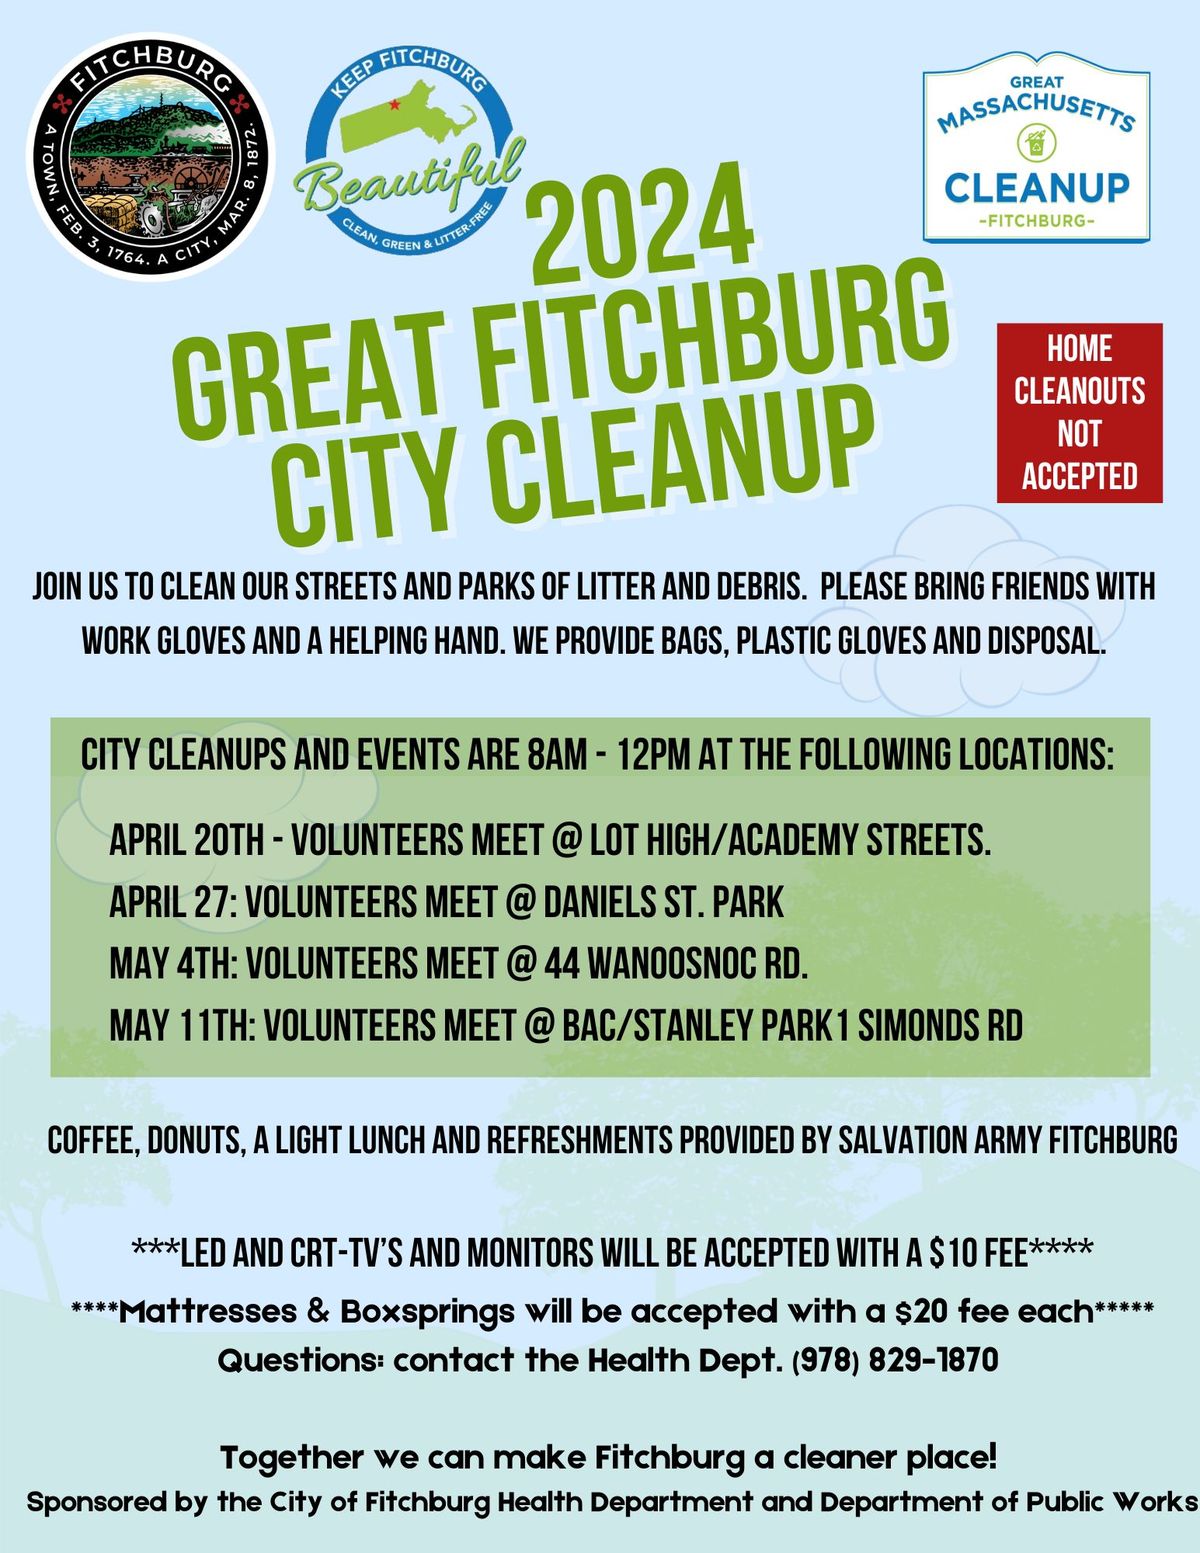 May 4th 2024 Great Fitchburg City Cleanup - 44 Wanoosnoc Rd